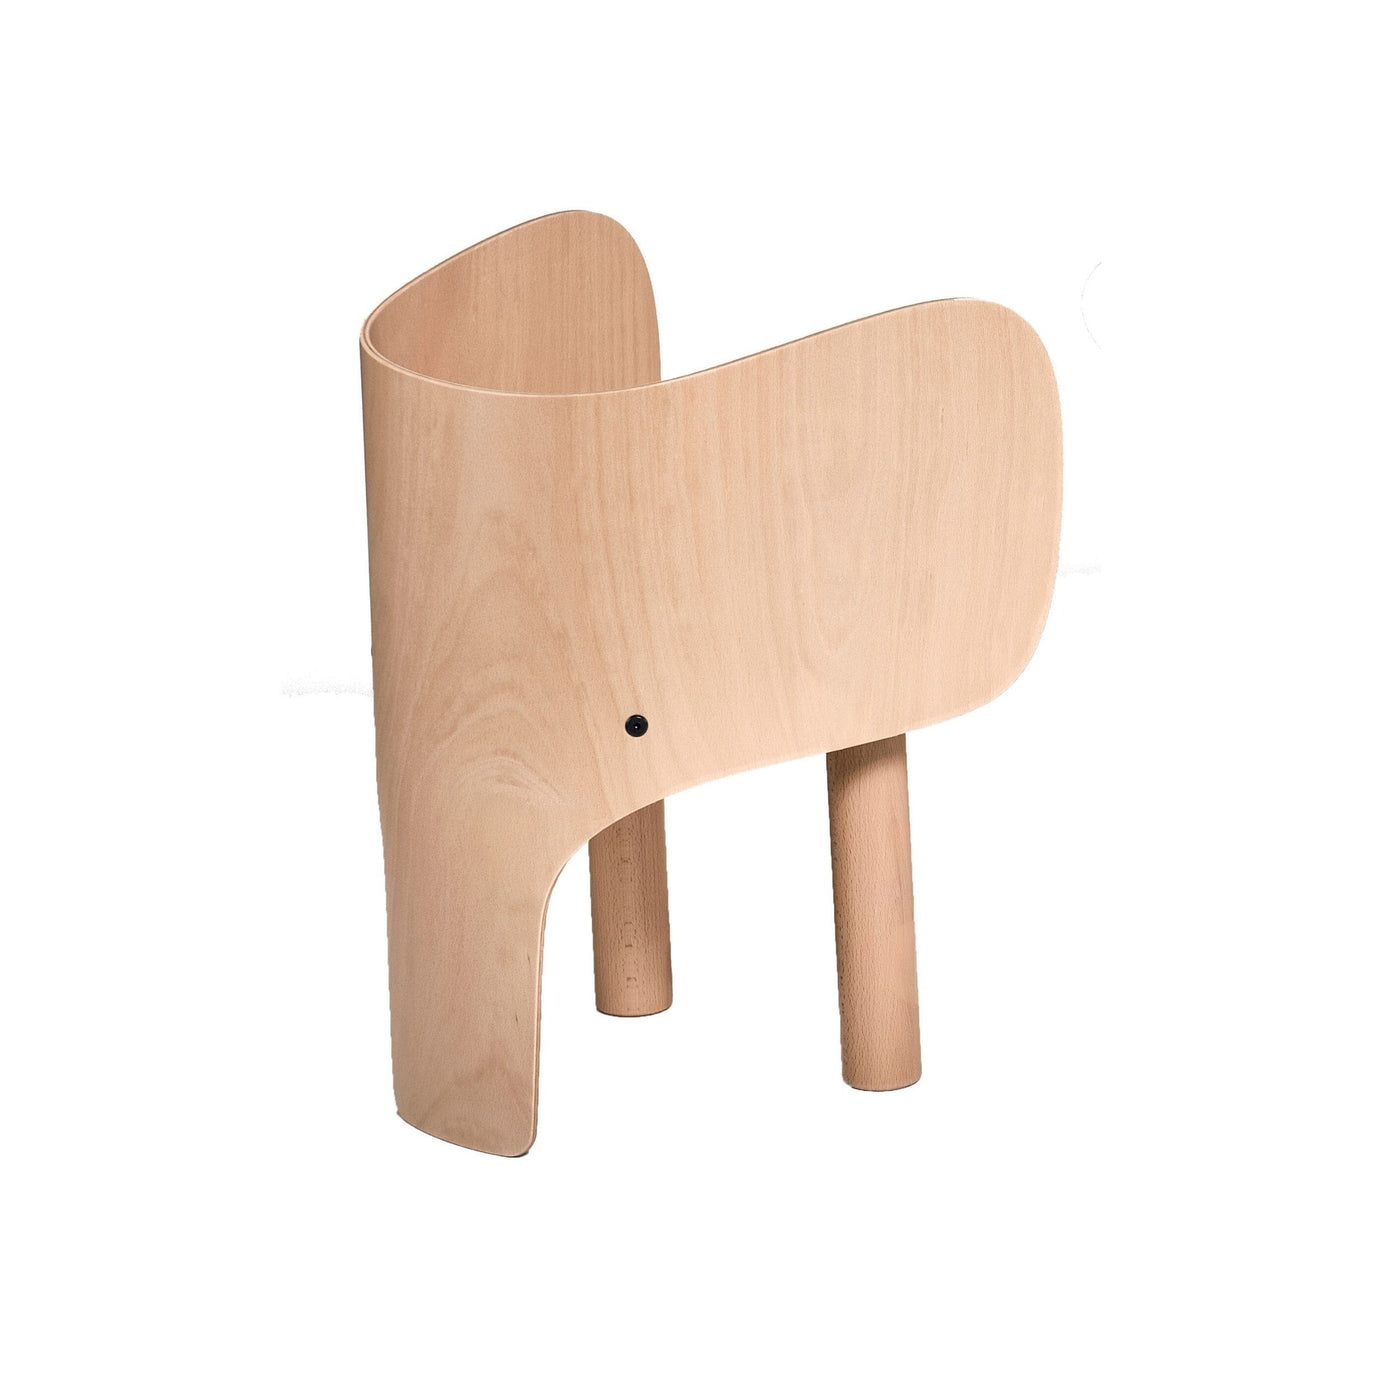 EO Elephant Chair. shop online at someday designs